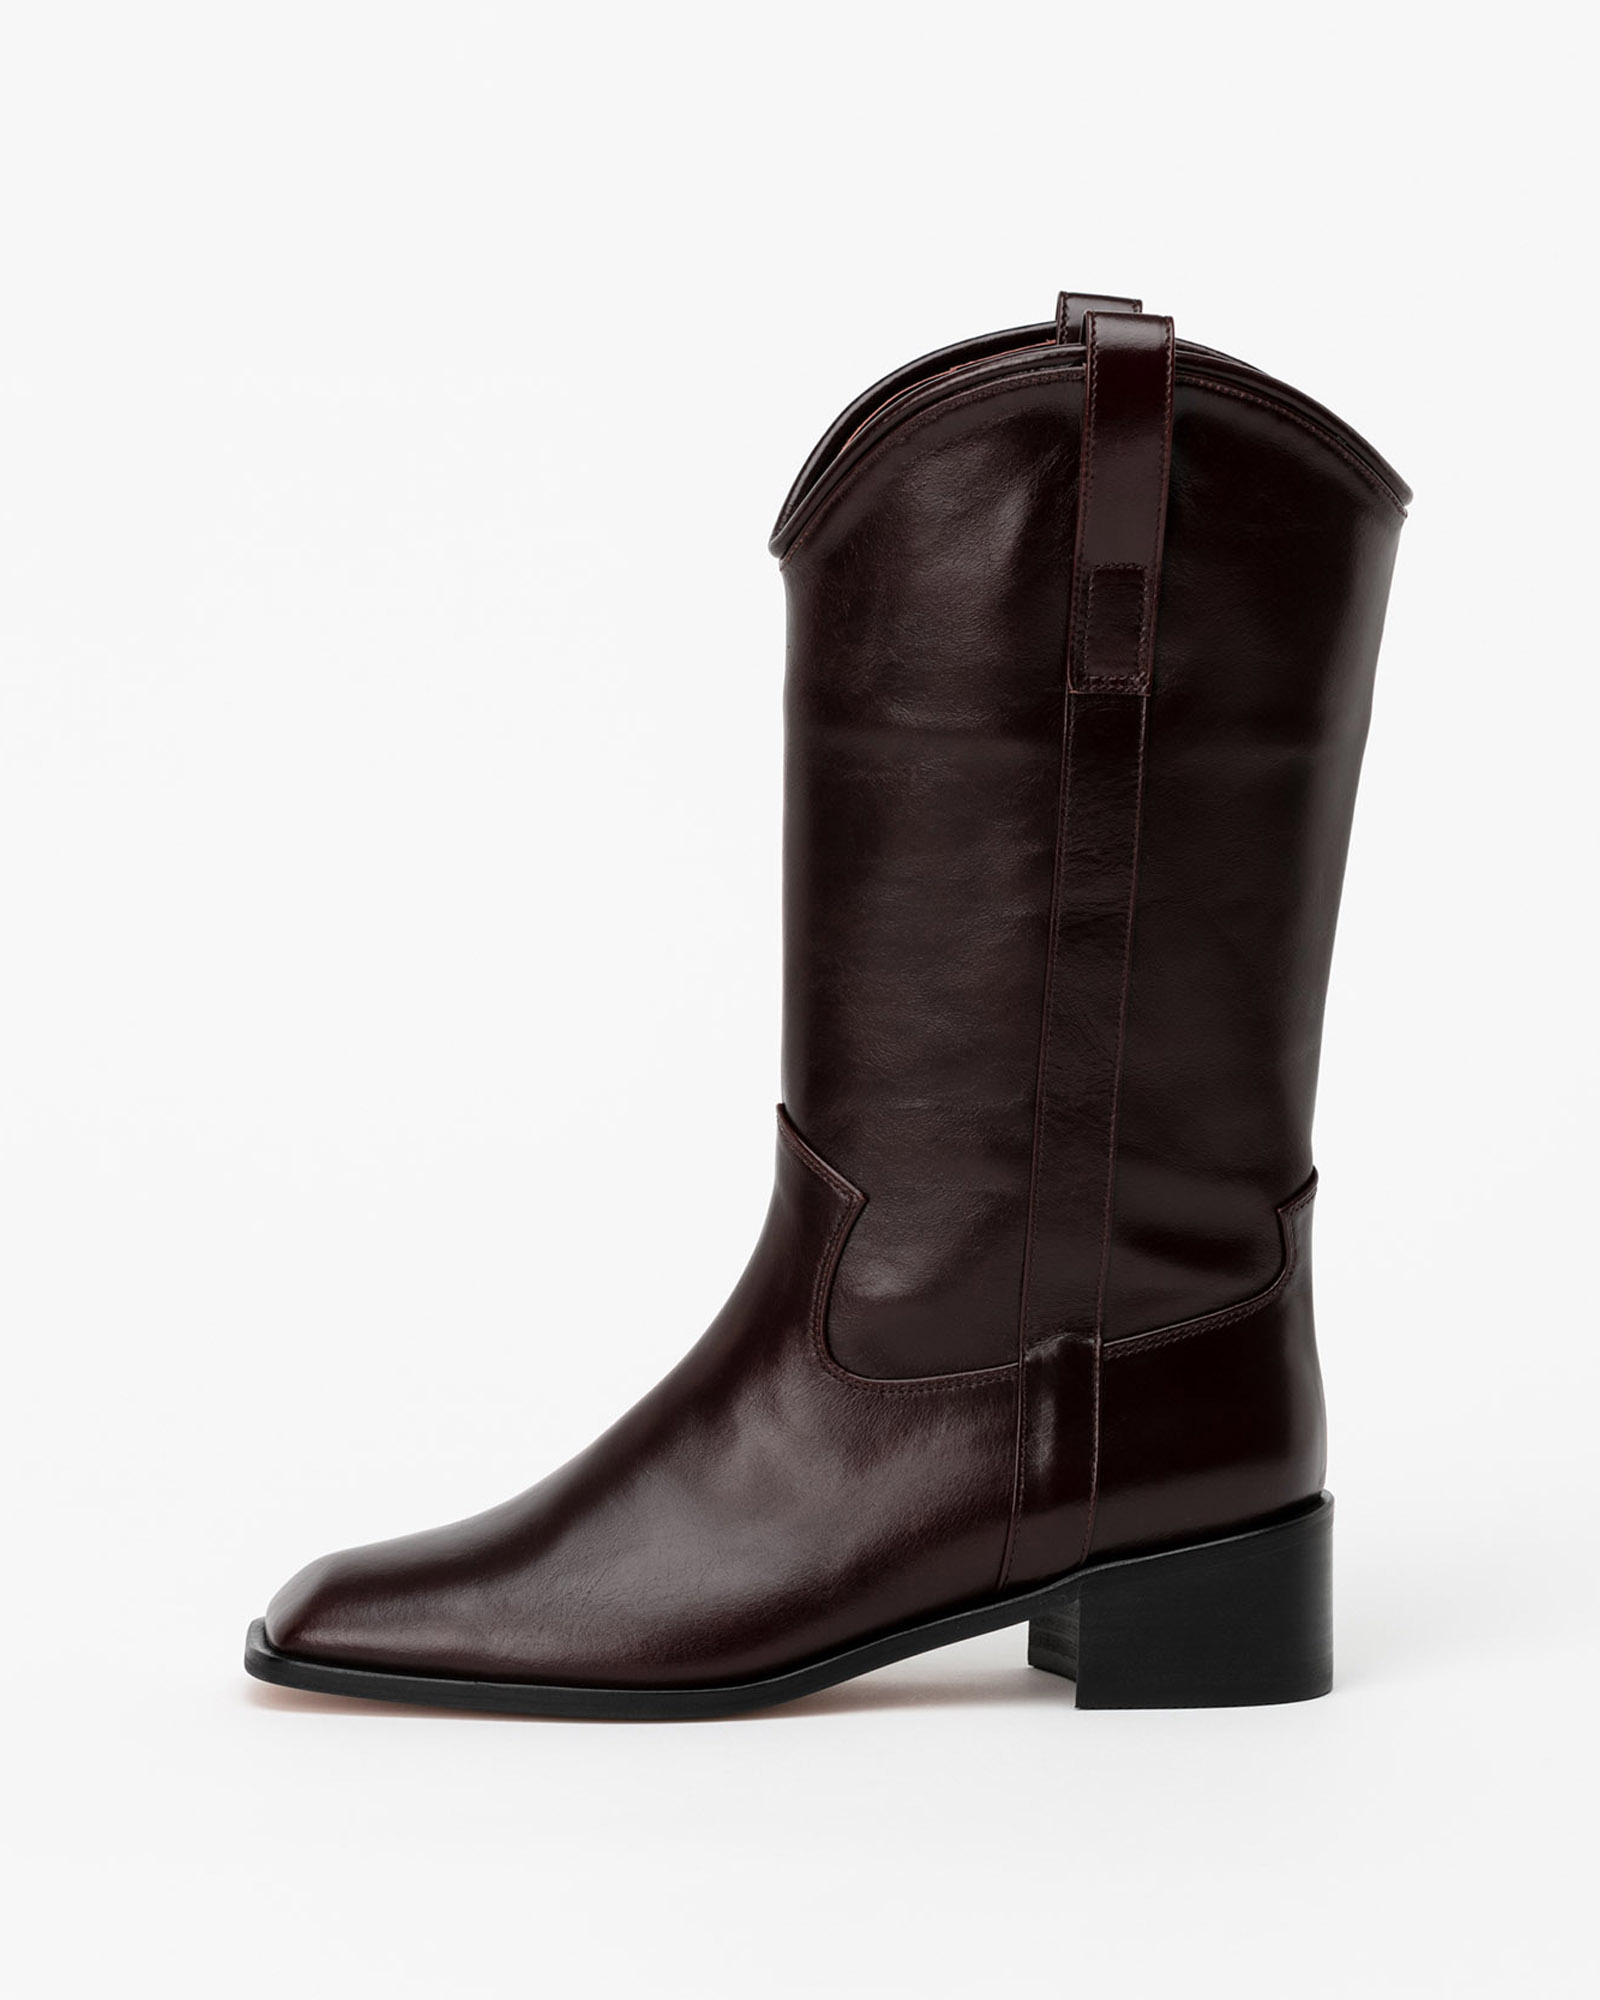 Toccata Square-toe Cowboy Boots in Textured Wine